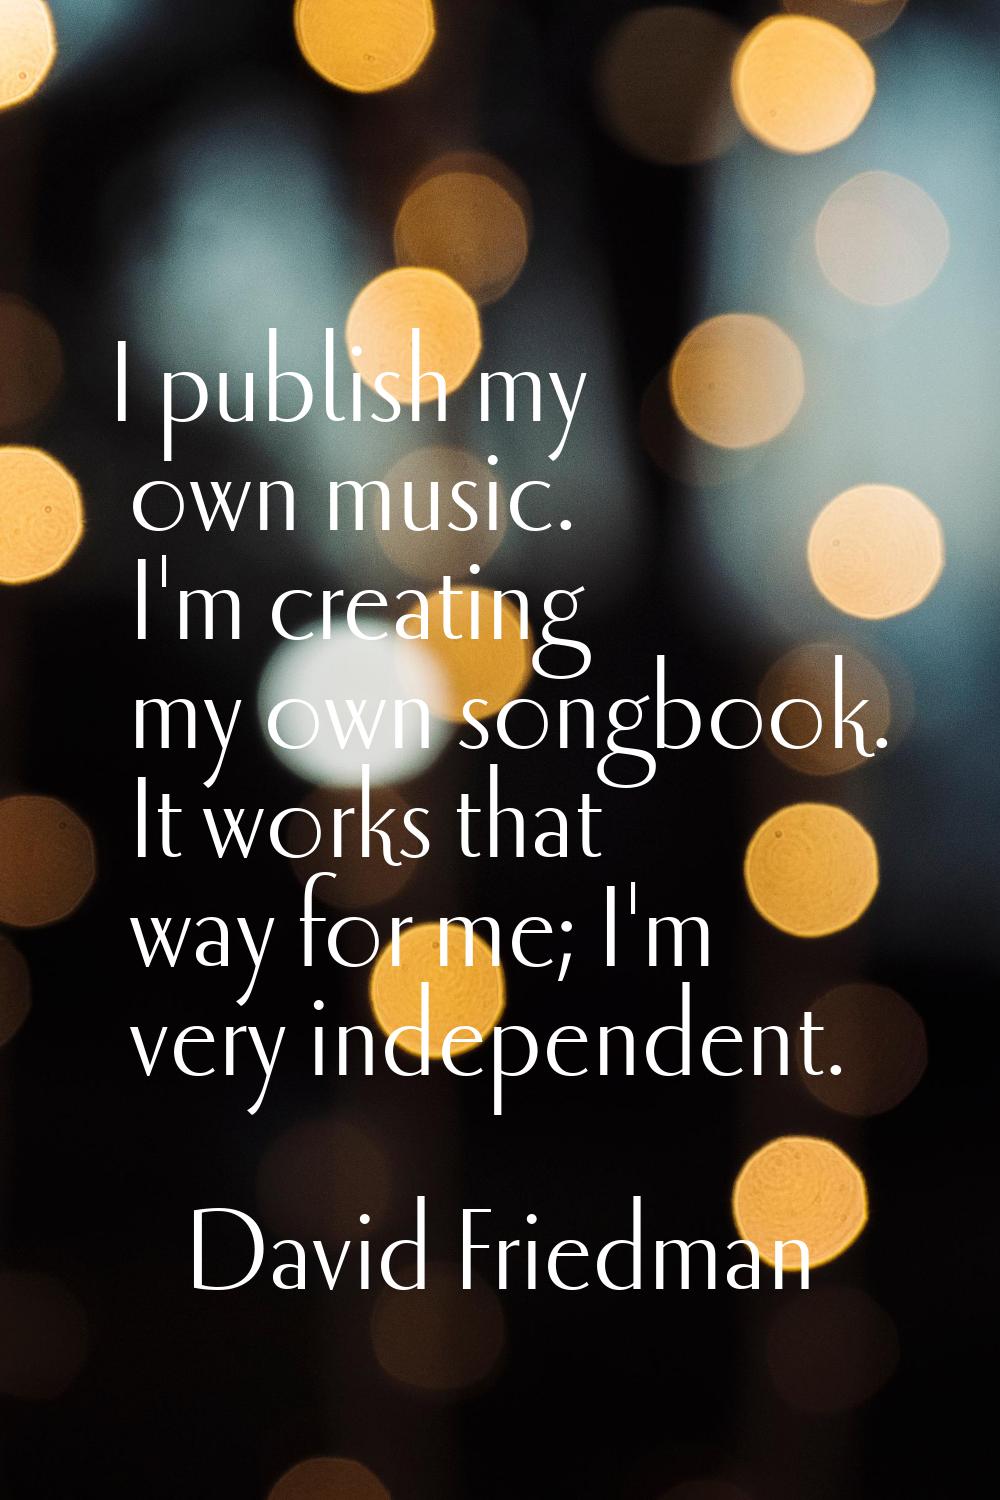 I publish my own music. I'm creating my own songbook. It works that way for me; I'm very independen